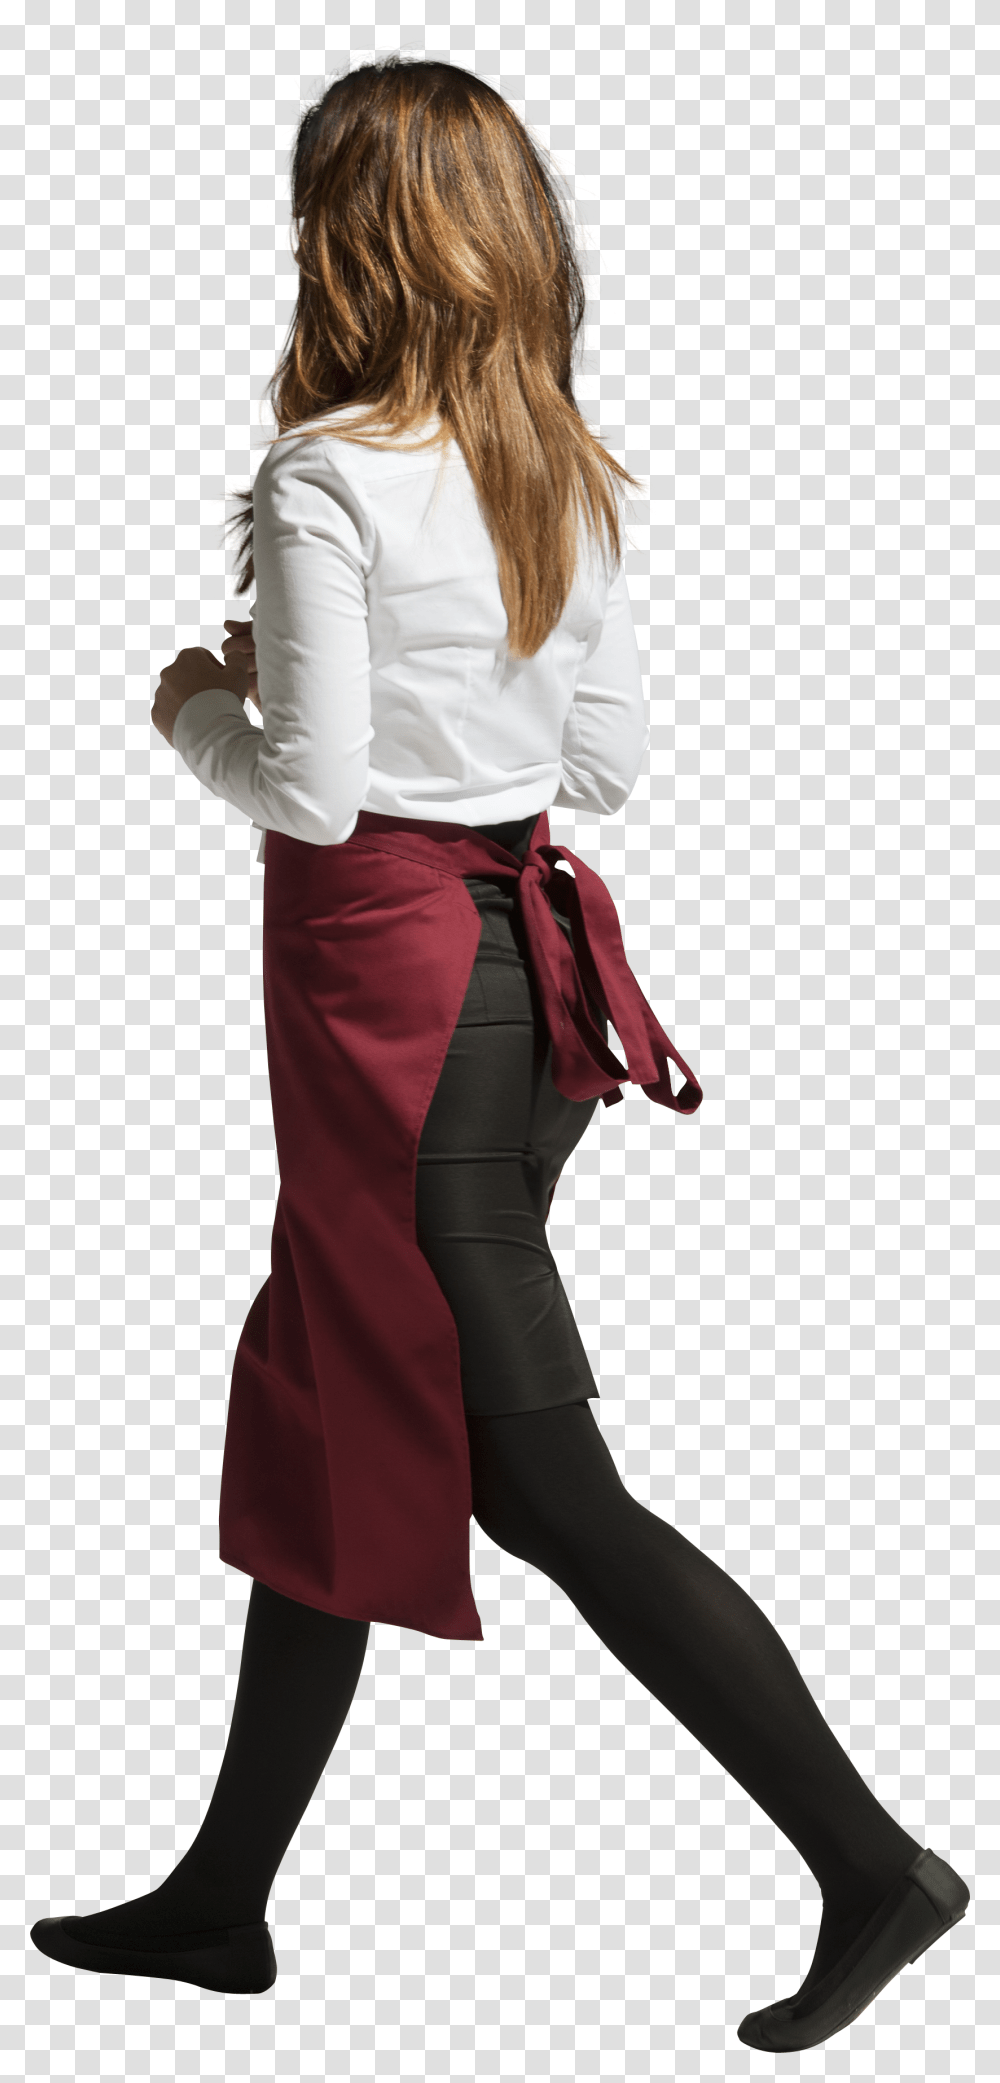 People Cutout Cut Out People People Render People People Waitress, Apparel, Female, Person Transparent Png